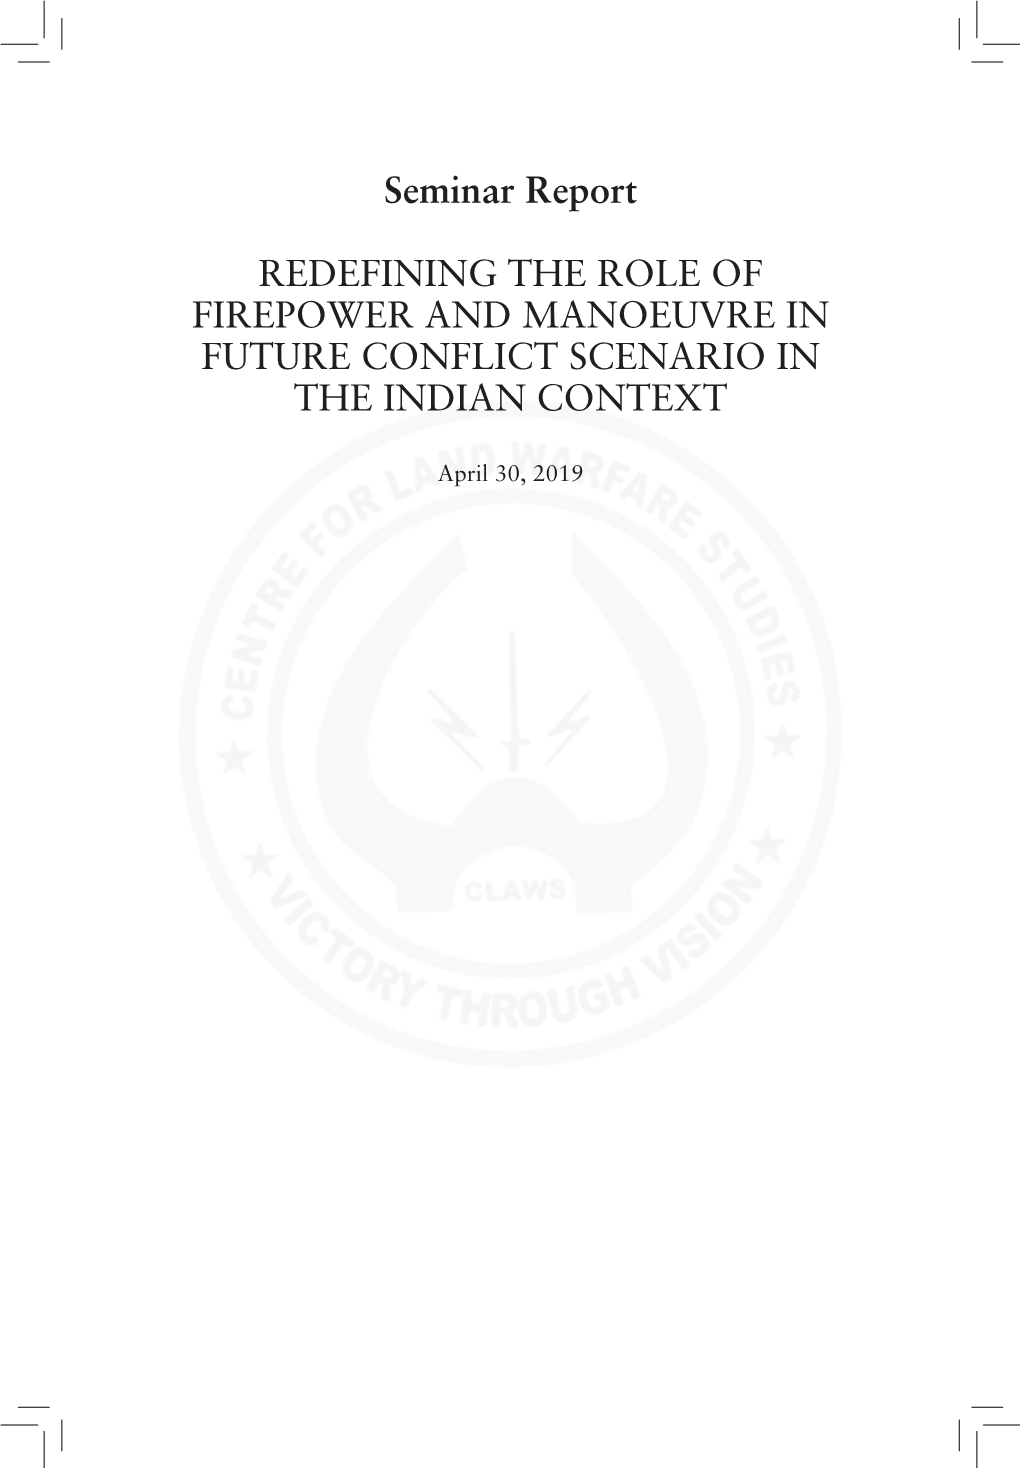 Seminar Report REDEFINING the ROLE of FIREPOWER AND